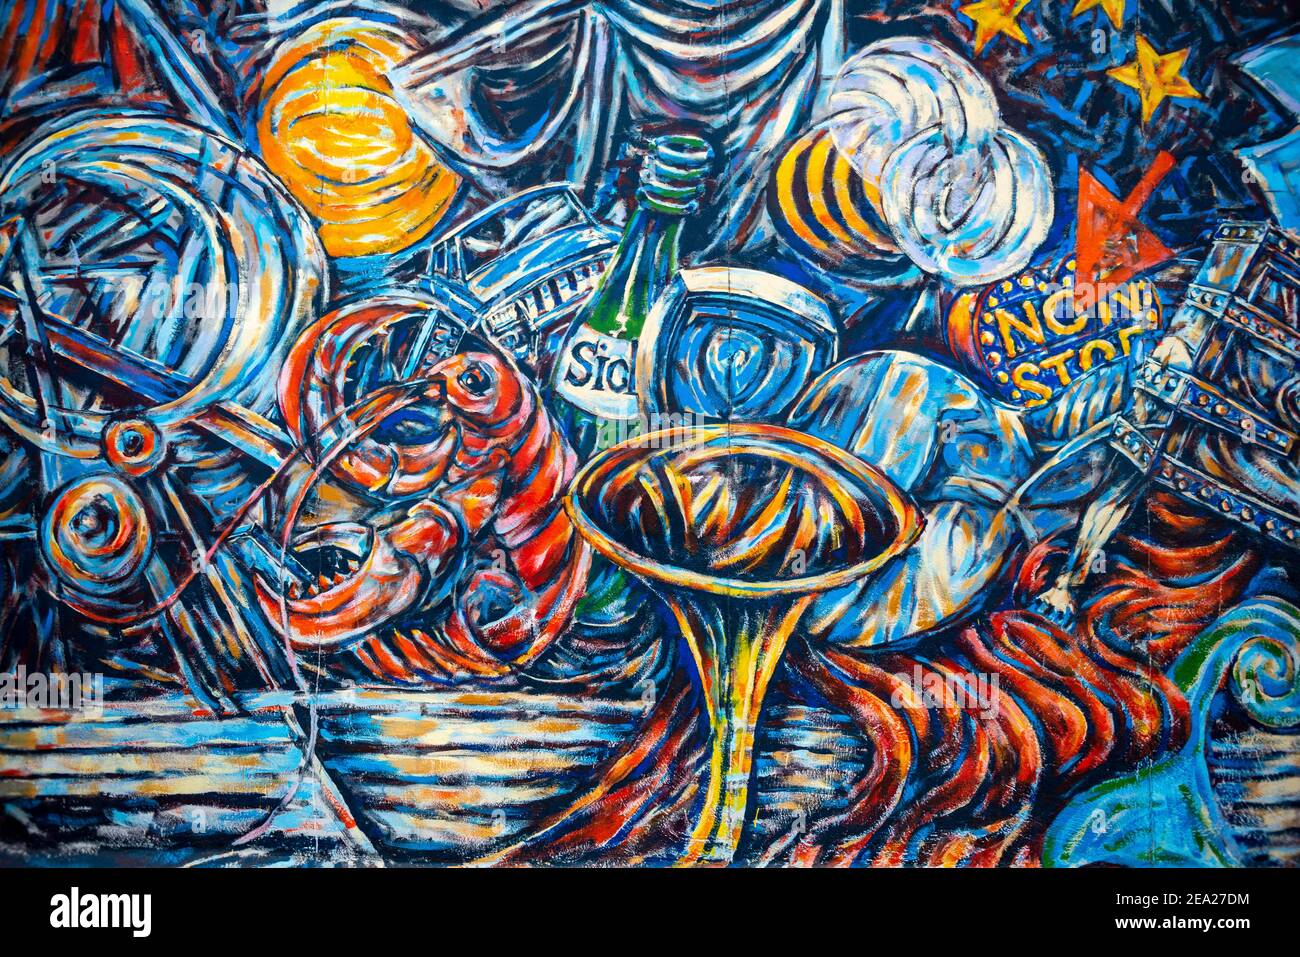 Mural Sky and Seeker, Still Life with Objects, artist Peter Russell, East Side Gallery, Mauergalerie, Berlin, Germany Stock Photo